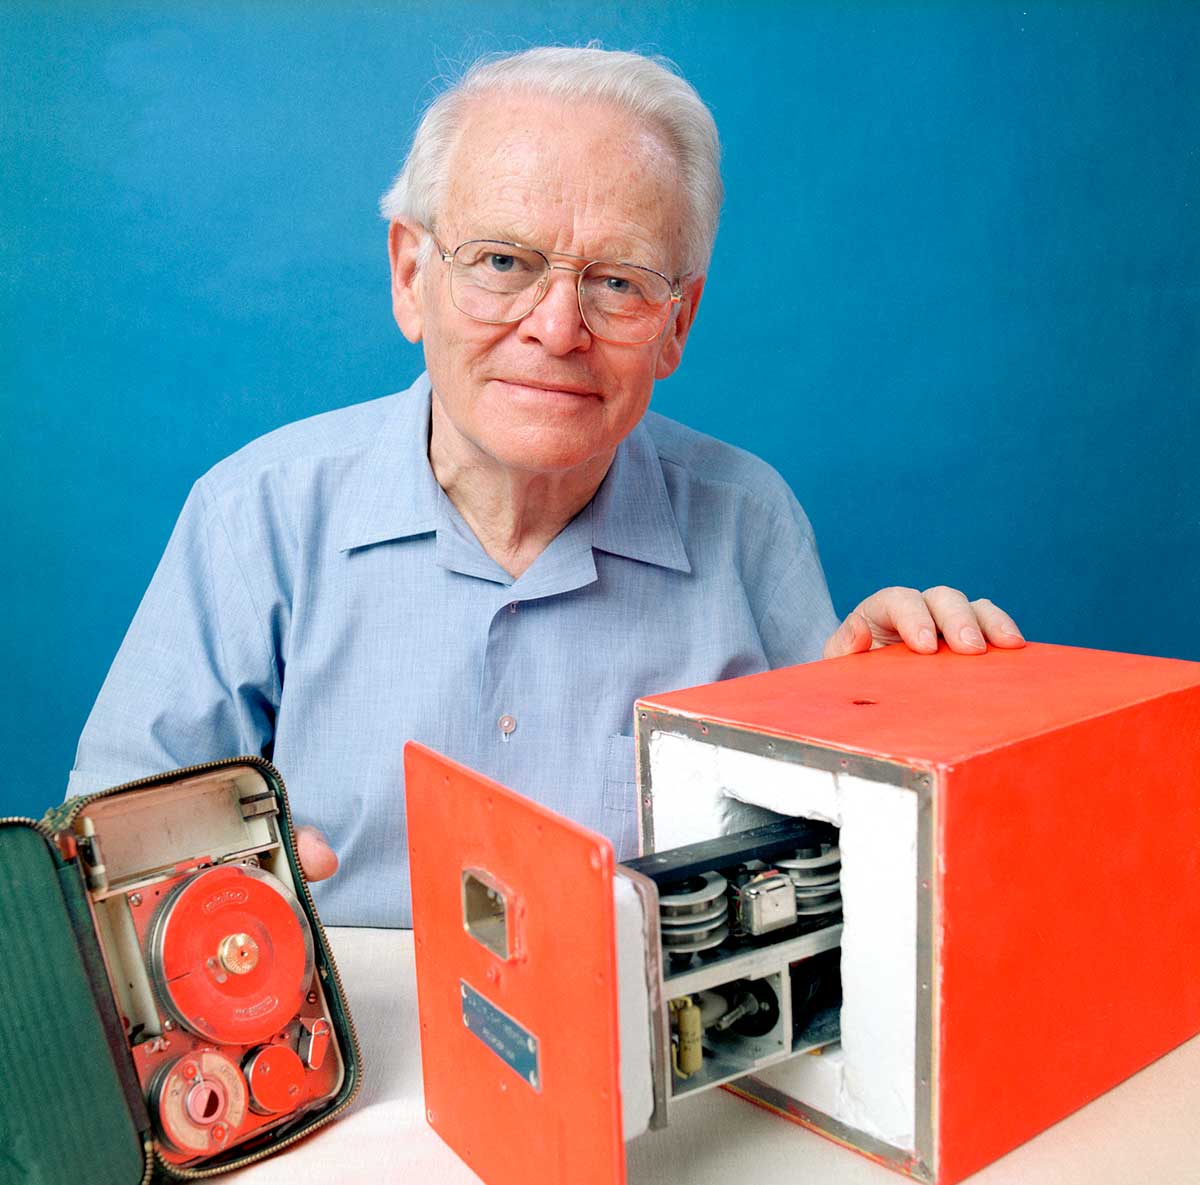 An elderly gentleman posing with two orange devices.